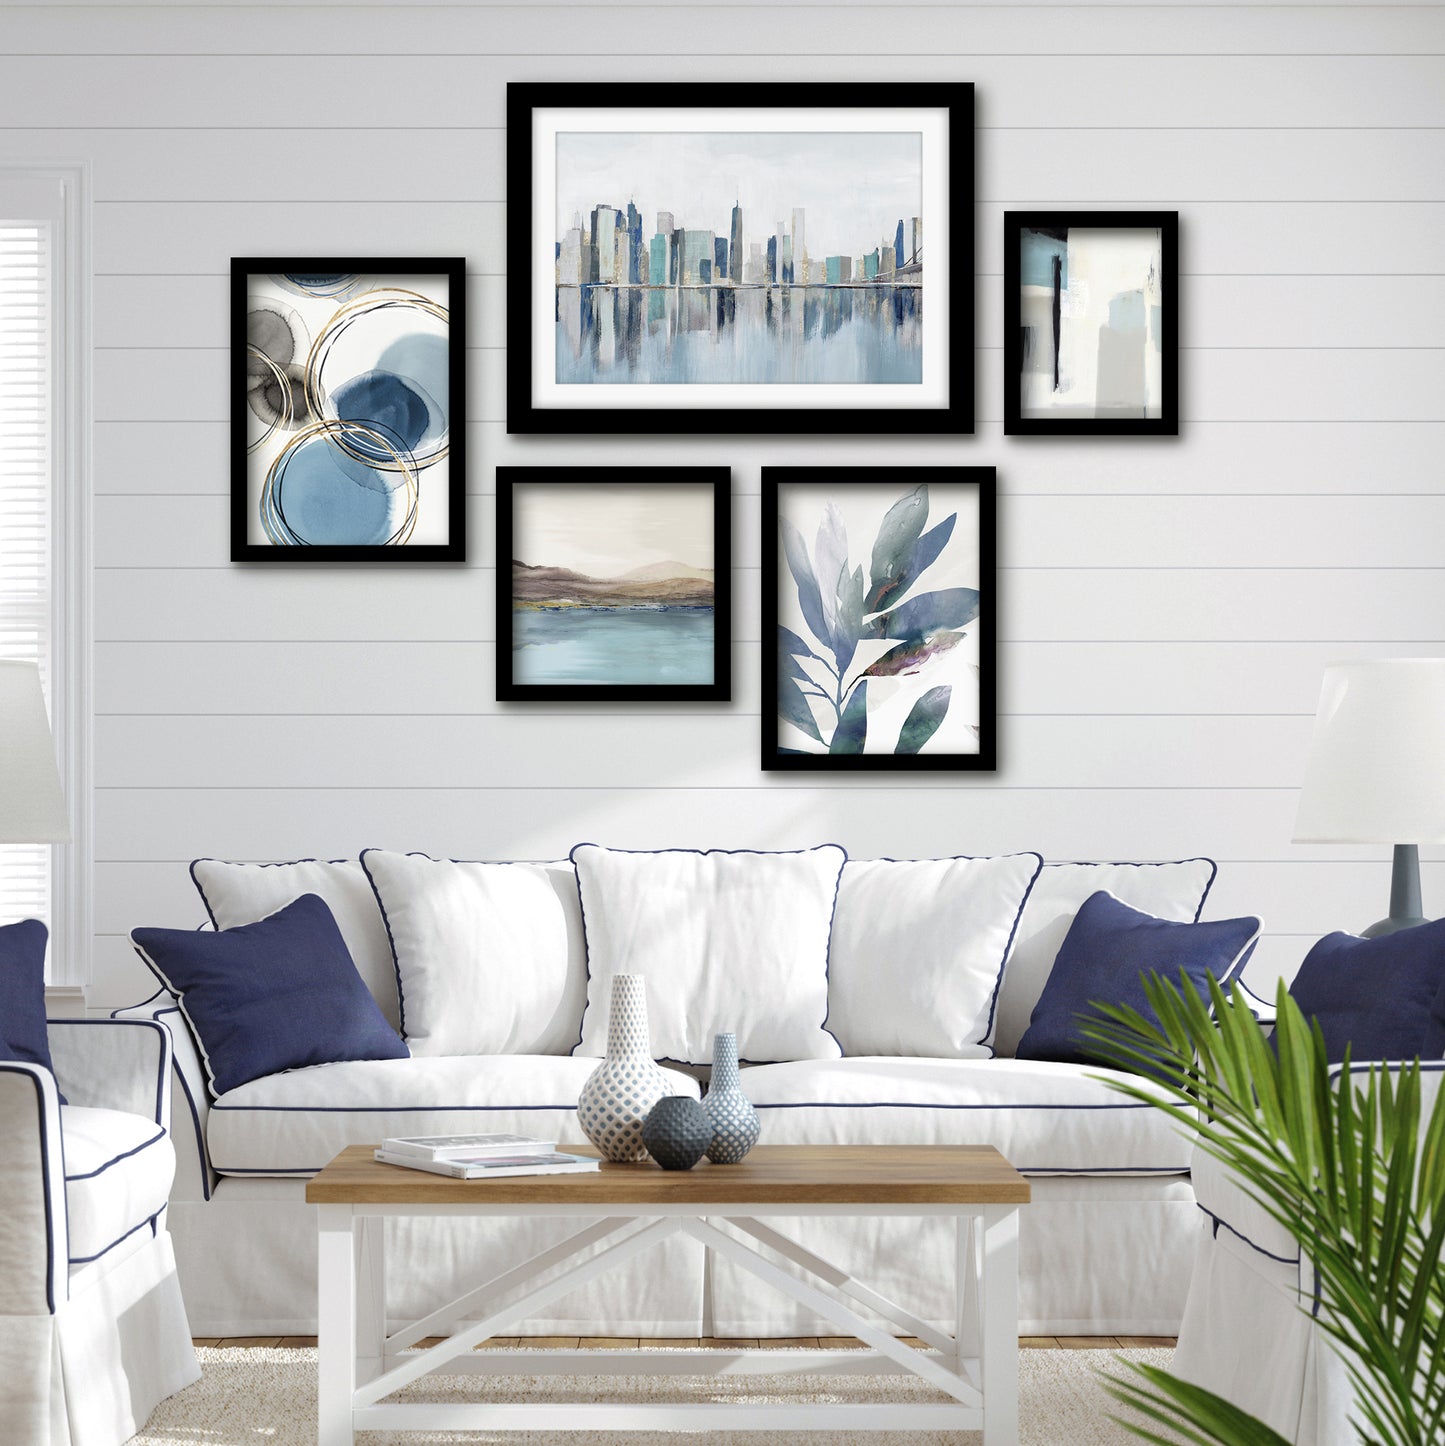 Americanflat 5 Piece Black Framed Gallery Wall Art Set - Blue Watercolor Floral Abstract NYC Skyline